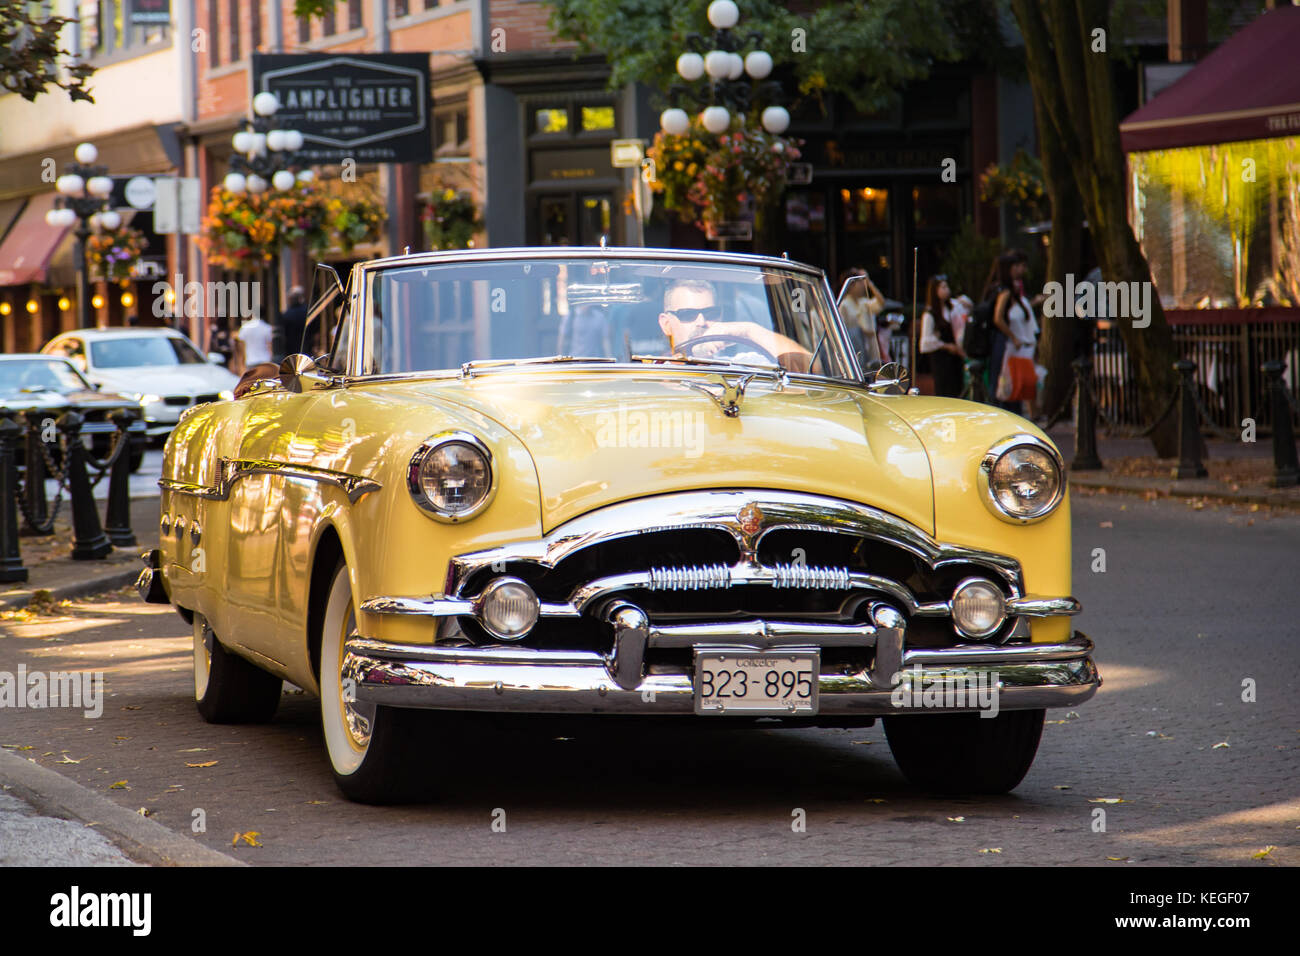 yellow-1953-packard-mayfair-automobile-with-classic-car-collectors-KEGF07.jpg